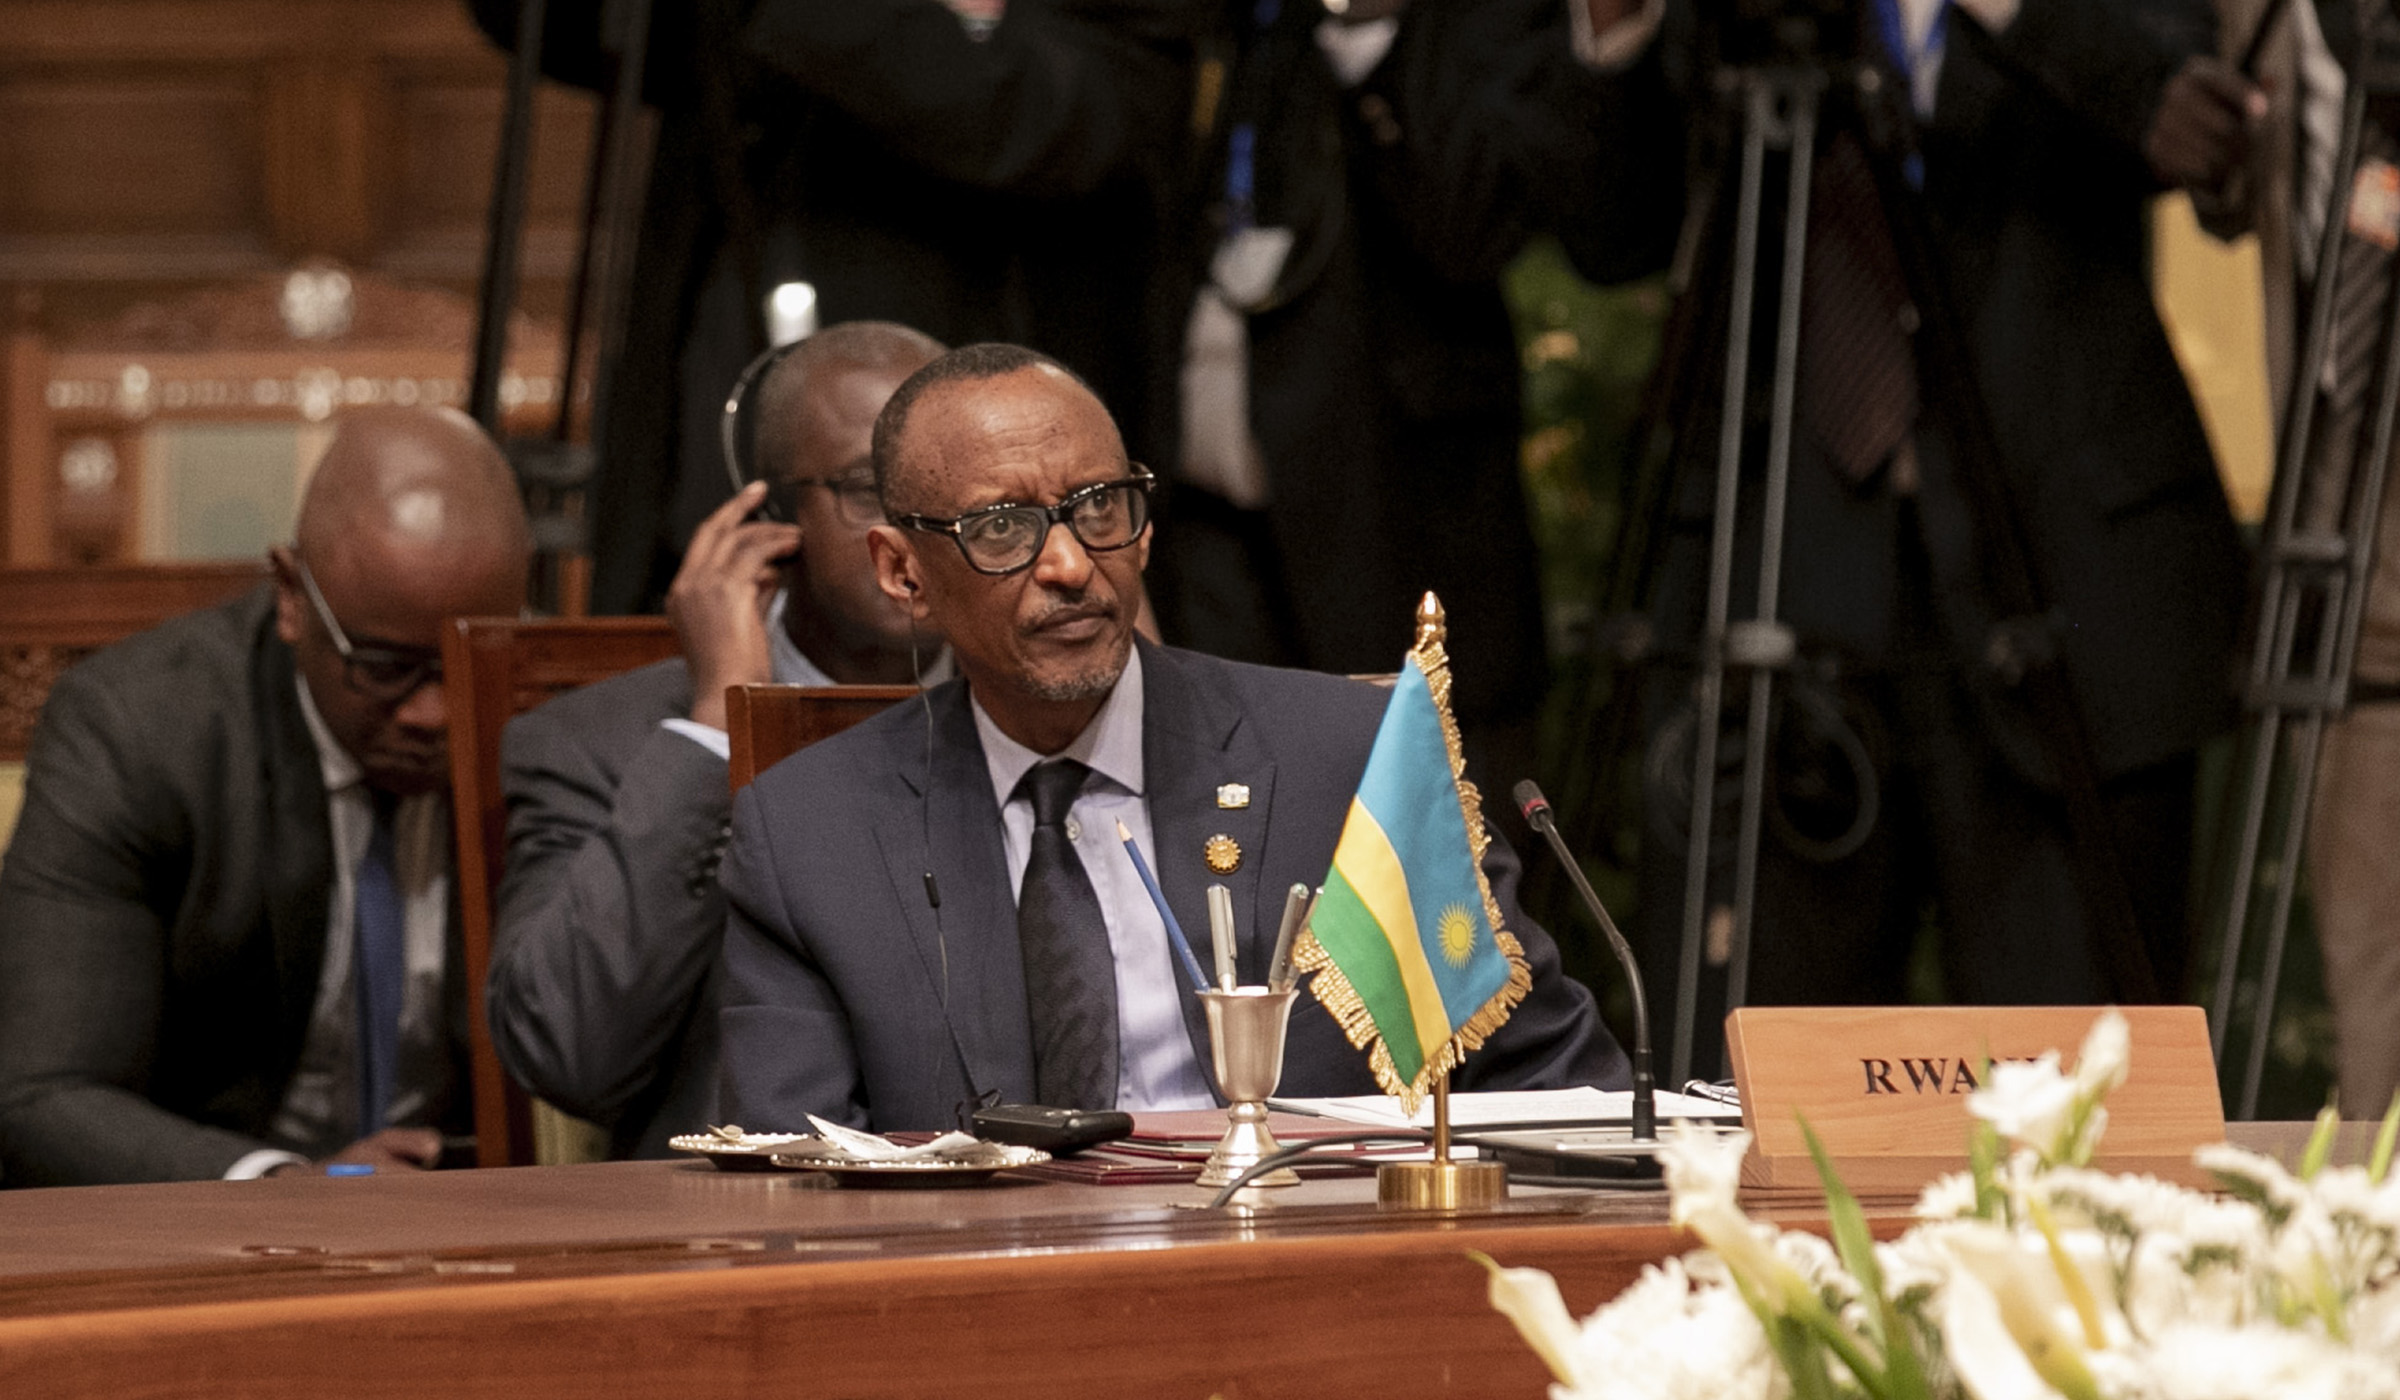 President Paul Kagame at a one-day AU Troika Summit on Libya and Sudan, convened by the current African Union Chairperson and Egyptian President Abdel Fattah el-Sisi, in Cairo yesterday. Other Heads of State in attendance included Cyril Ramaphosa of South Africa, Idriss Du00e9by of Chad, and Ismail Omar Guelleh of Djibouti. The AU Troika is currently composed of Rwanda as the former AU Chair, Egypt in its capacity as the current Chair, and South Africa as the next Chair. The summit, which discussed the way forward in light of recent developments in Sudan and Libya, came in the wake of the ouster of Sudanese President Omar al-Bashir amid mass protests, and an assault on the Libyan capital of Tripoli by troops loyal to Gen Khalifa Haftar. Village Urugwiro. 